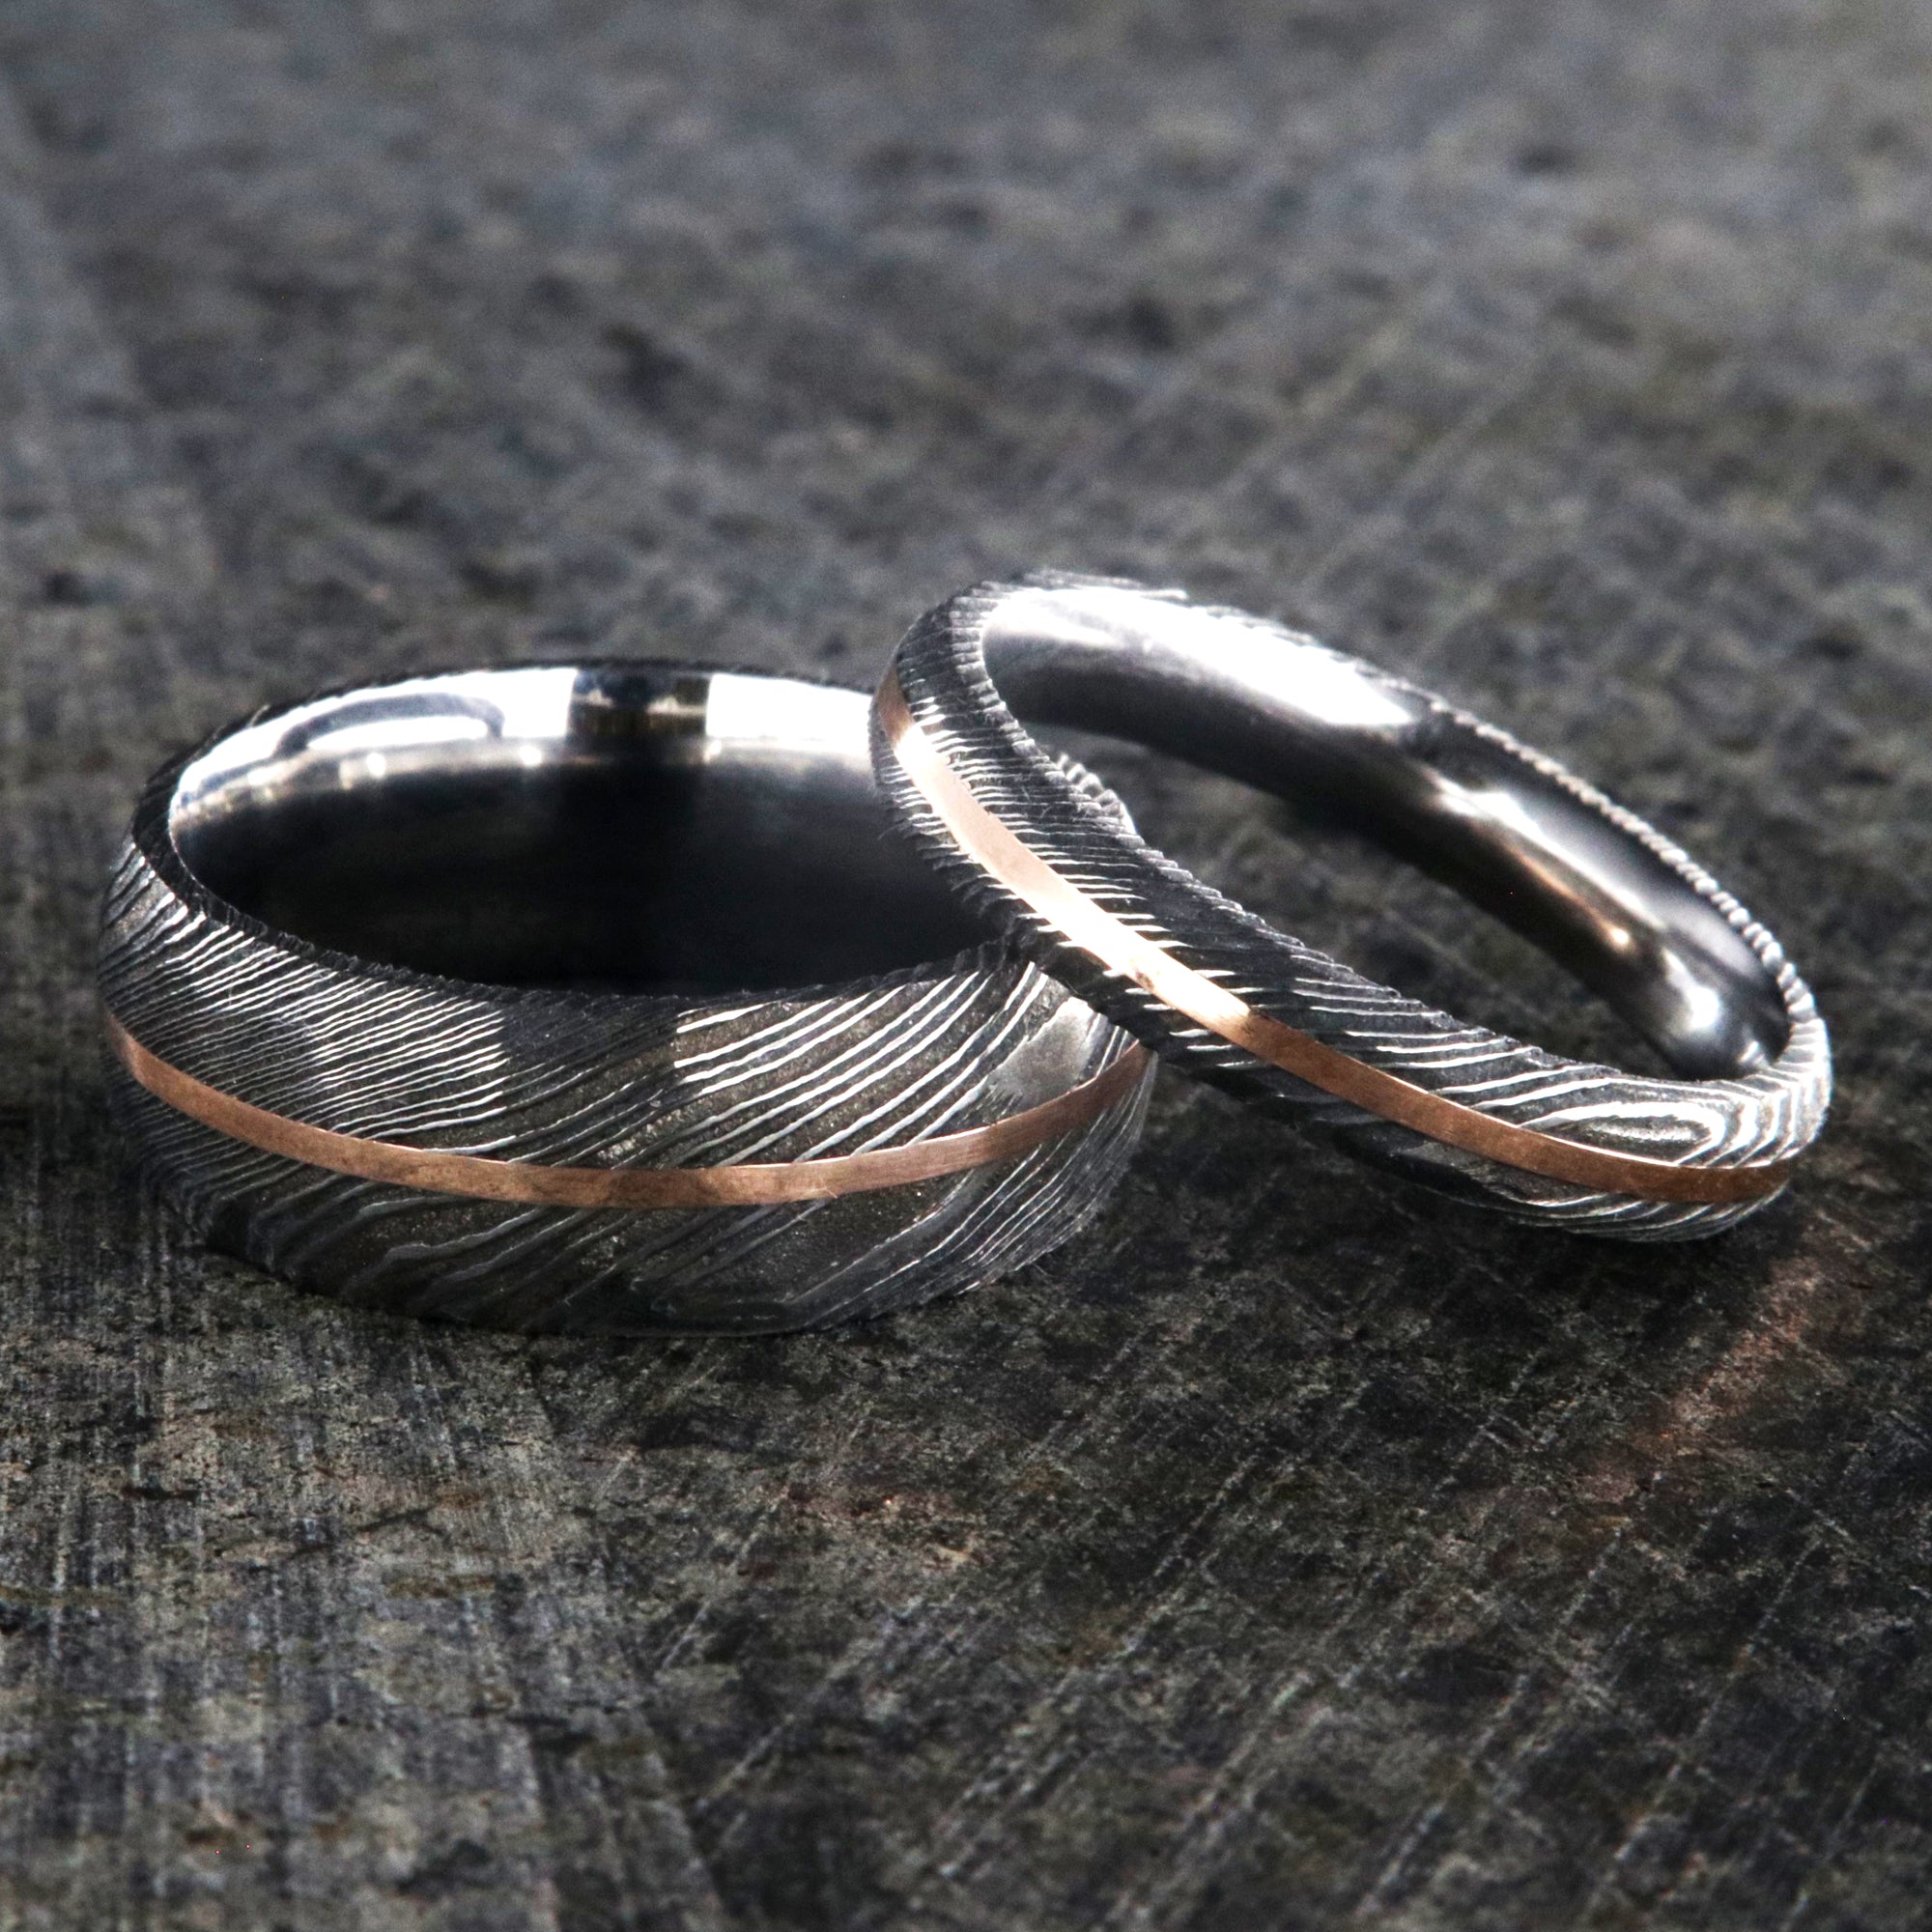 8mm and 4mm wide Damascus steel wedding ring set with a hammered finish and centered rose gold inlay